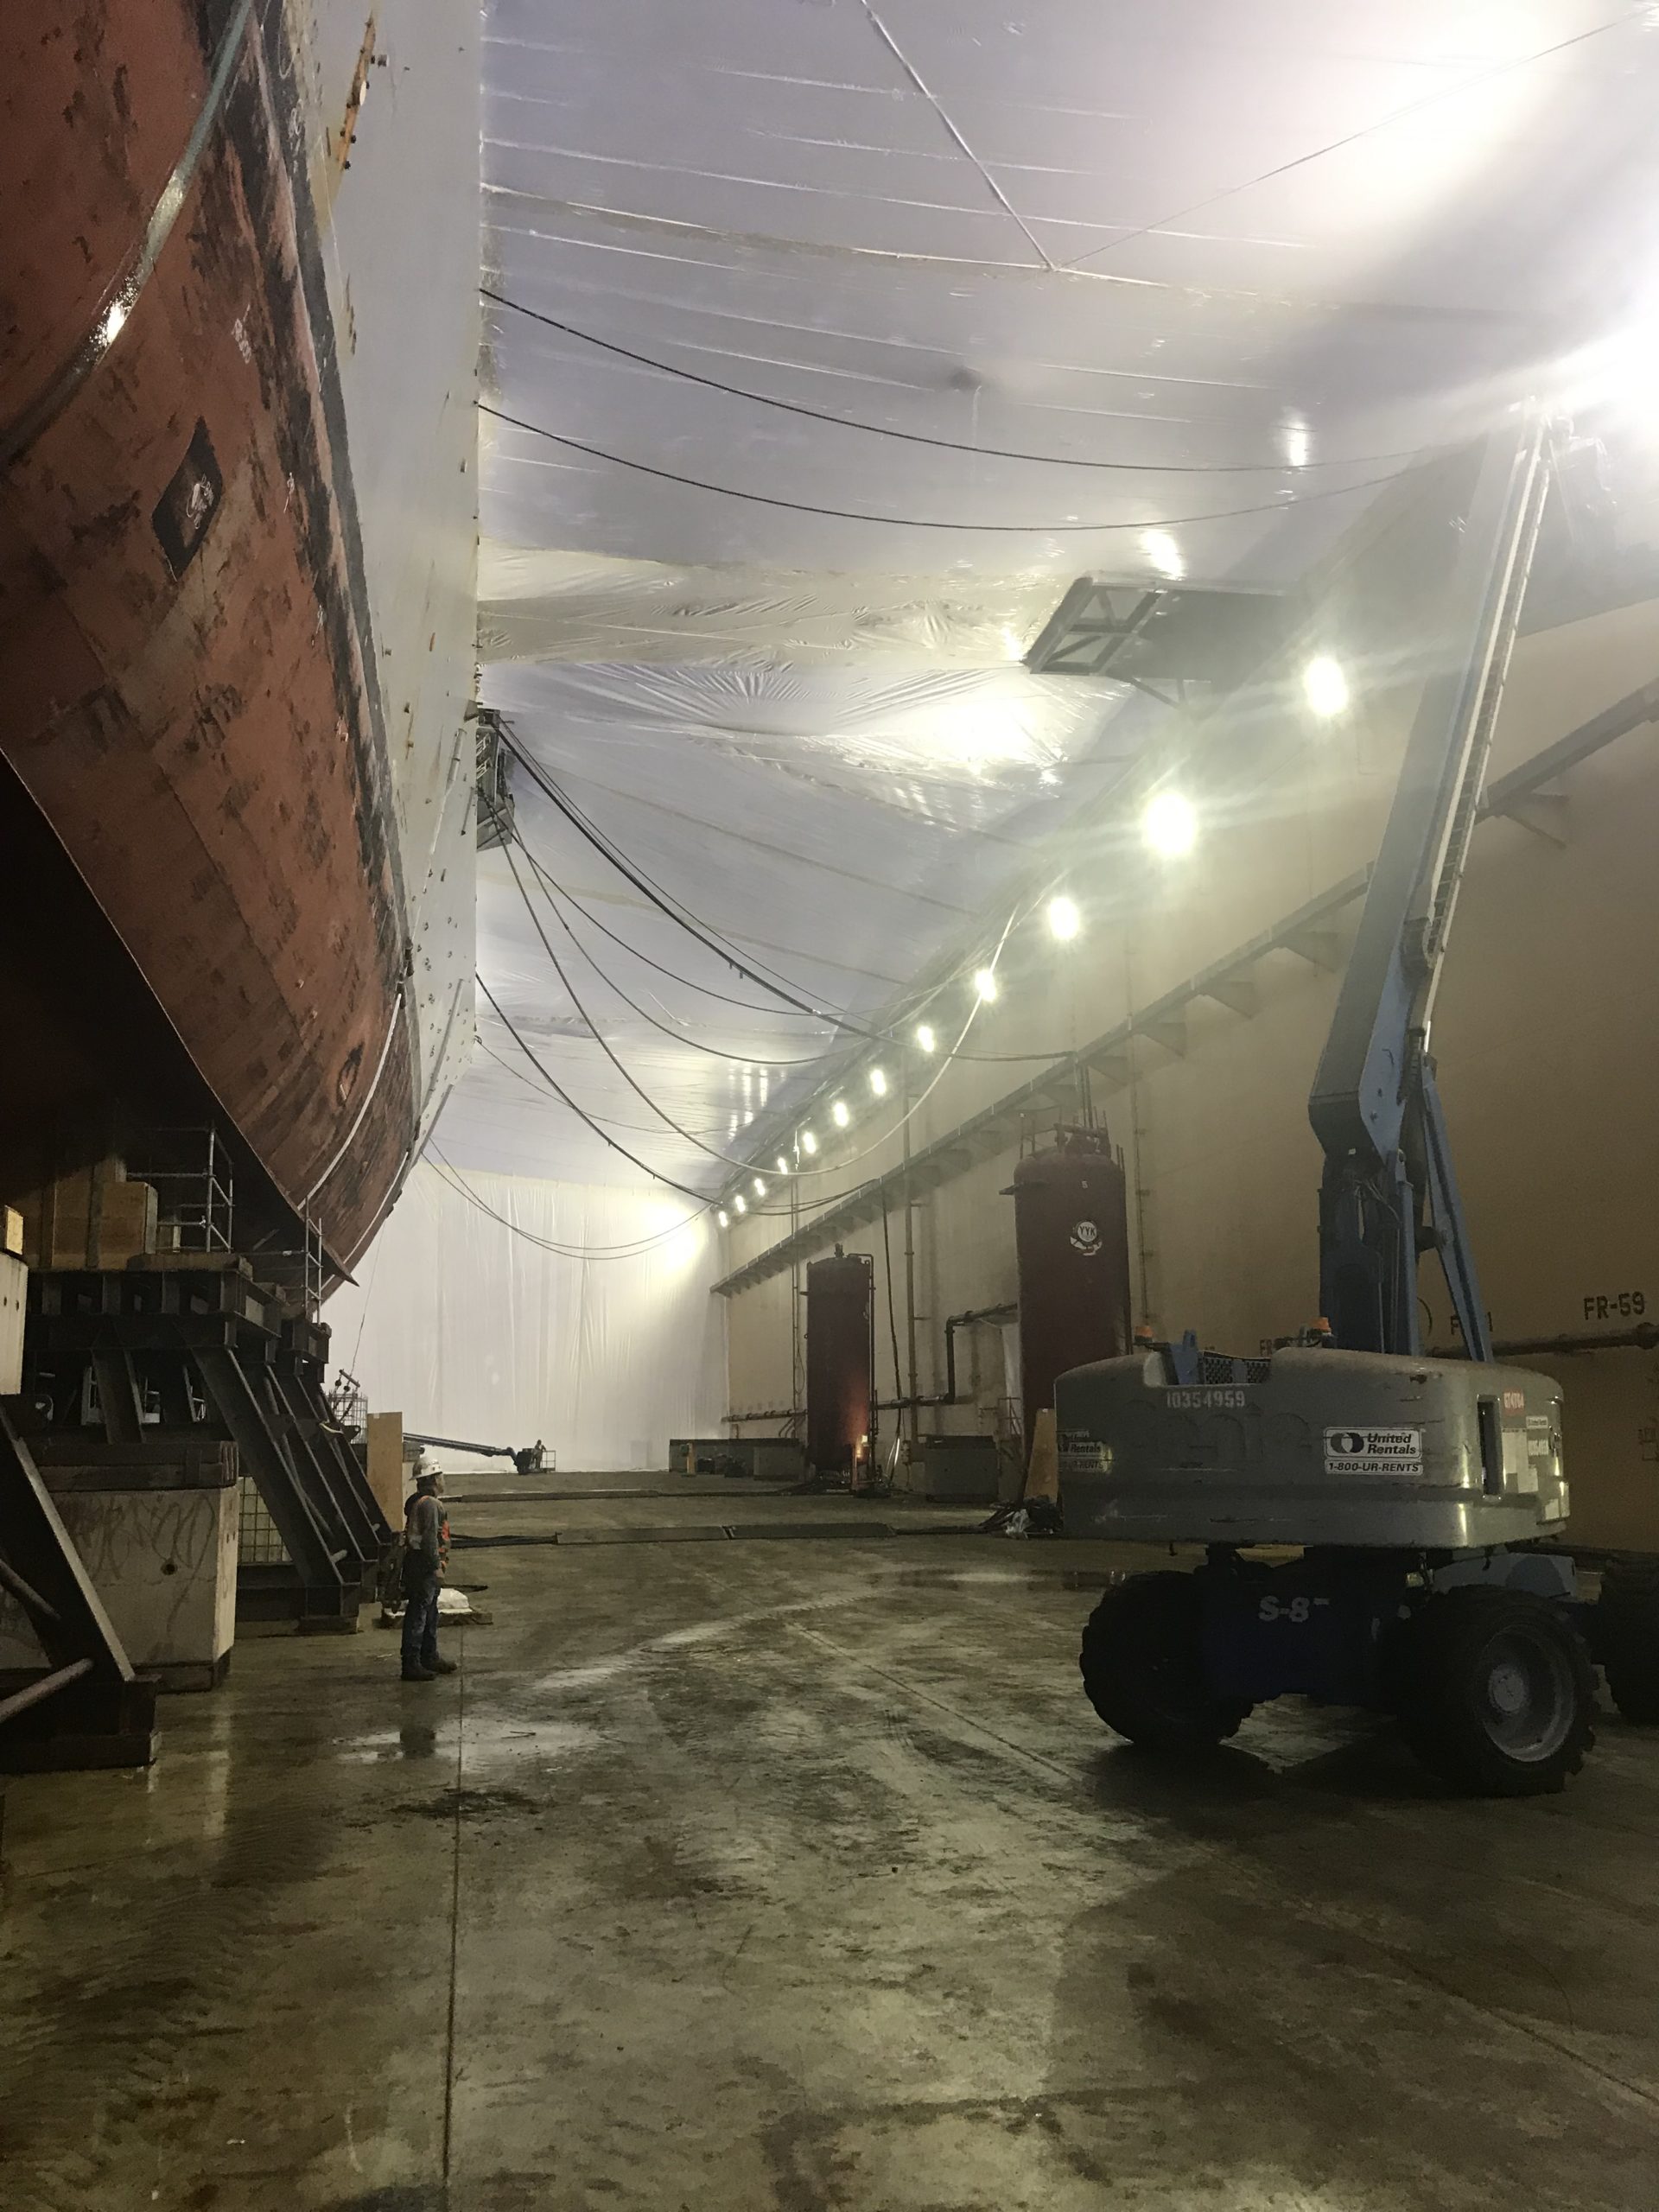 Premier Scaffold, Inc. is diligently working on a ship in their warehouse.